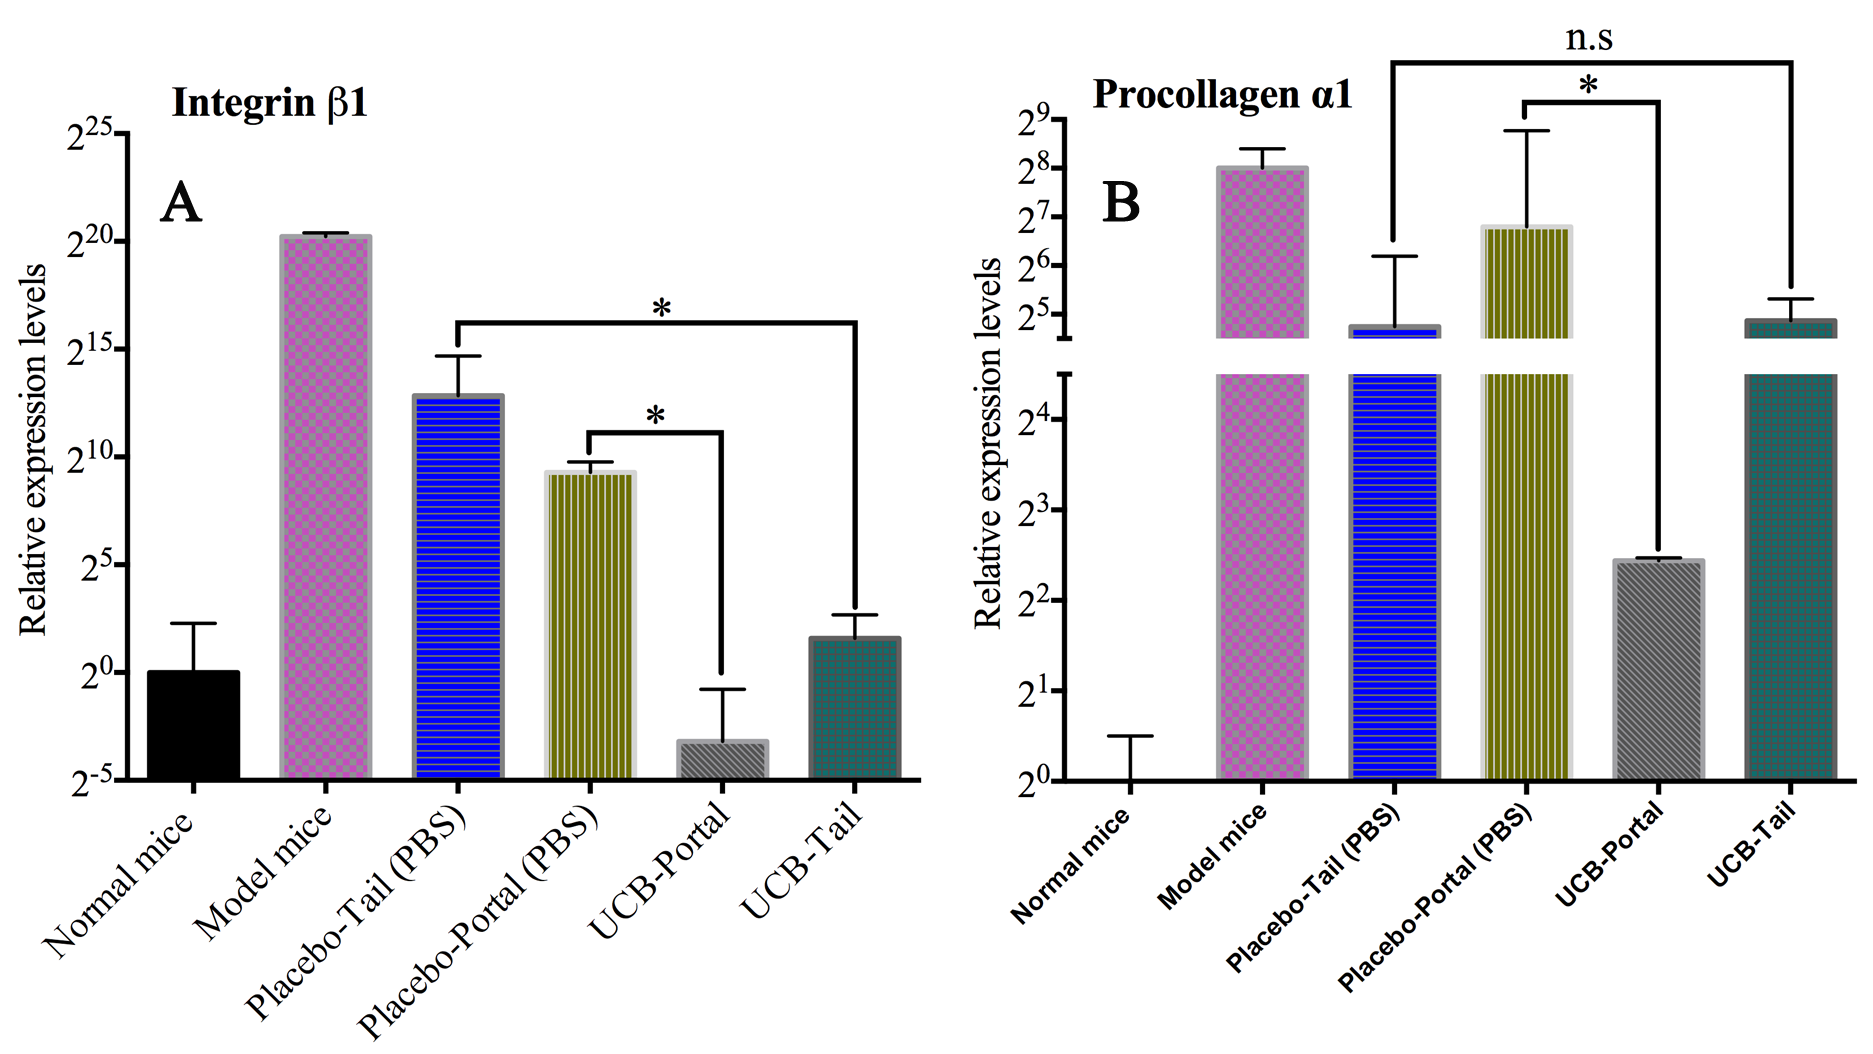 Figure 4
The comparison of integrin beta 1 and procollagen α1 gene expression in the groups